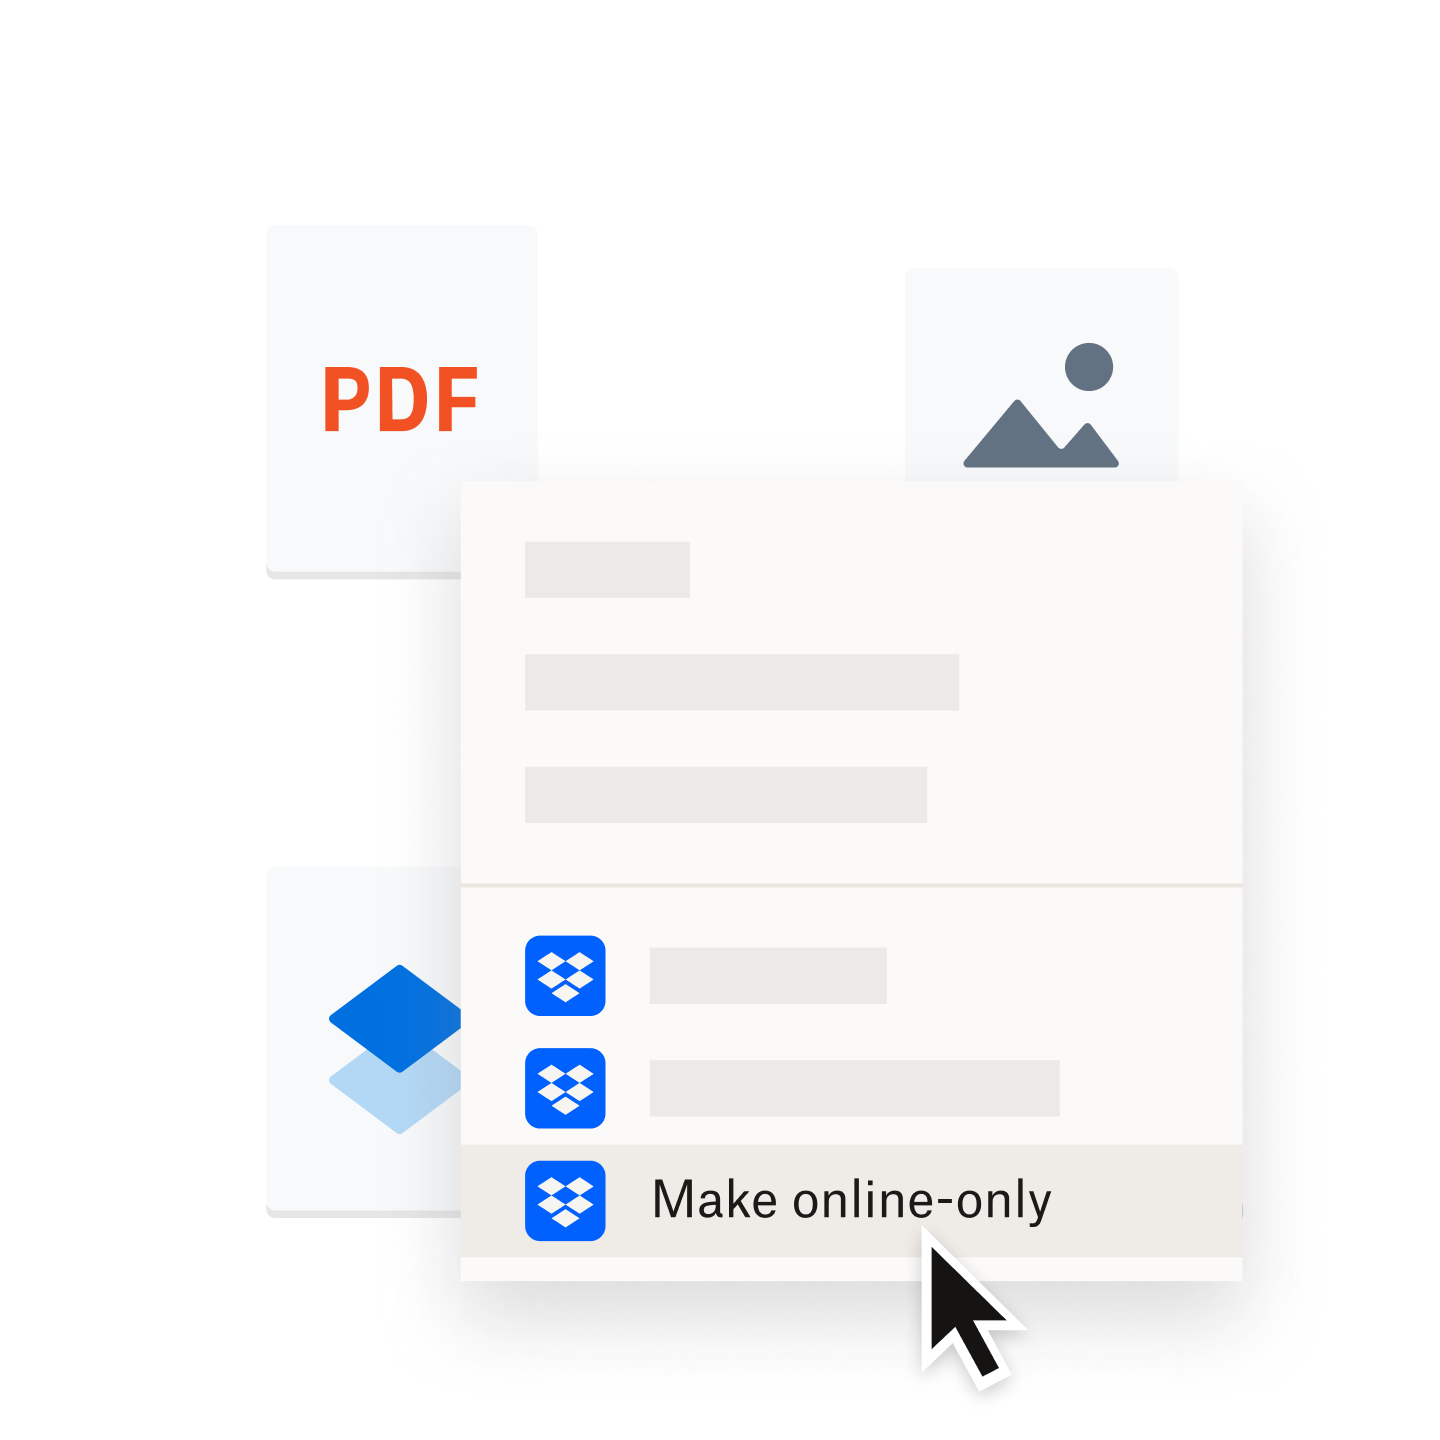 PDF file saved in a Dropbox folder that is being marked online-only